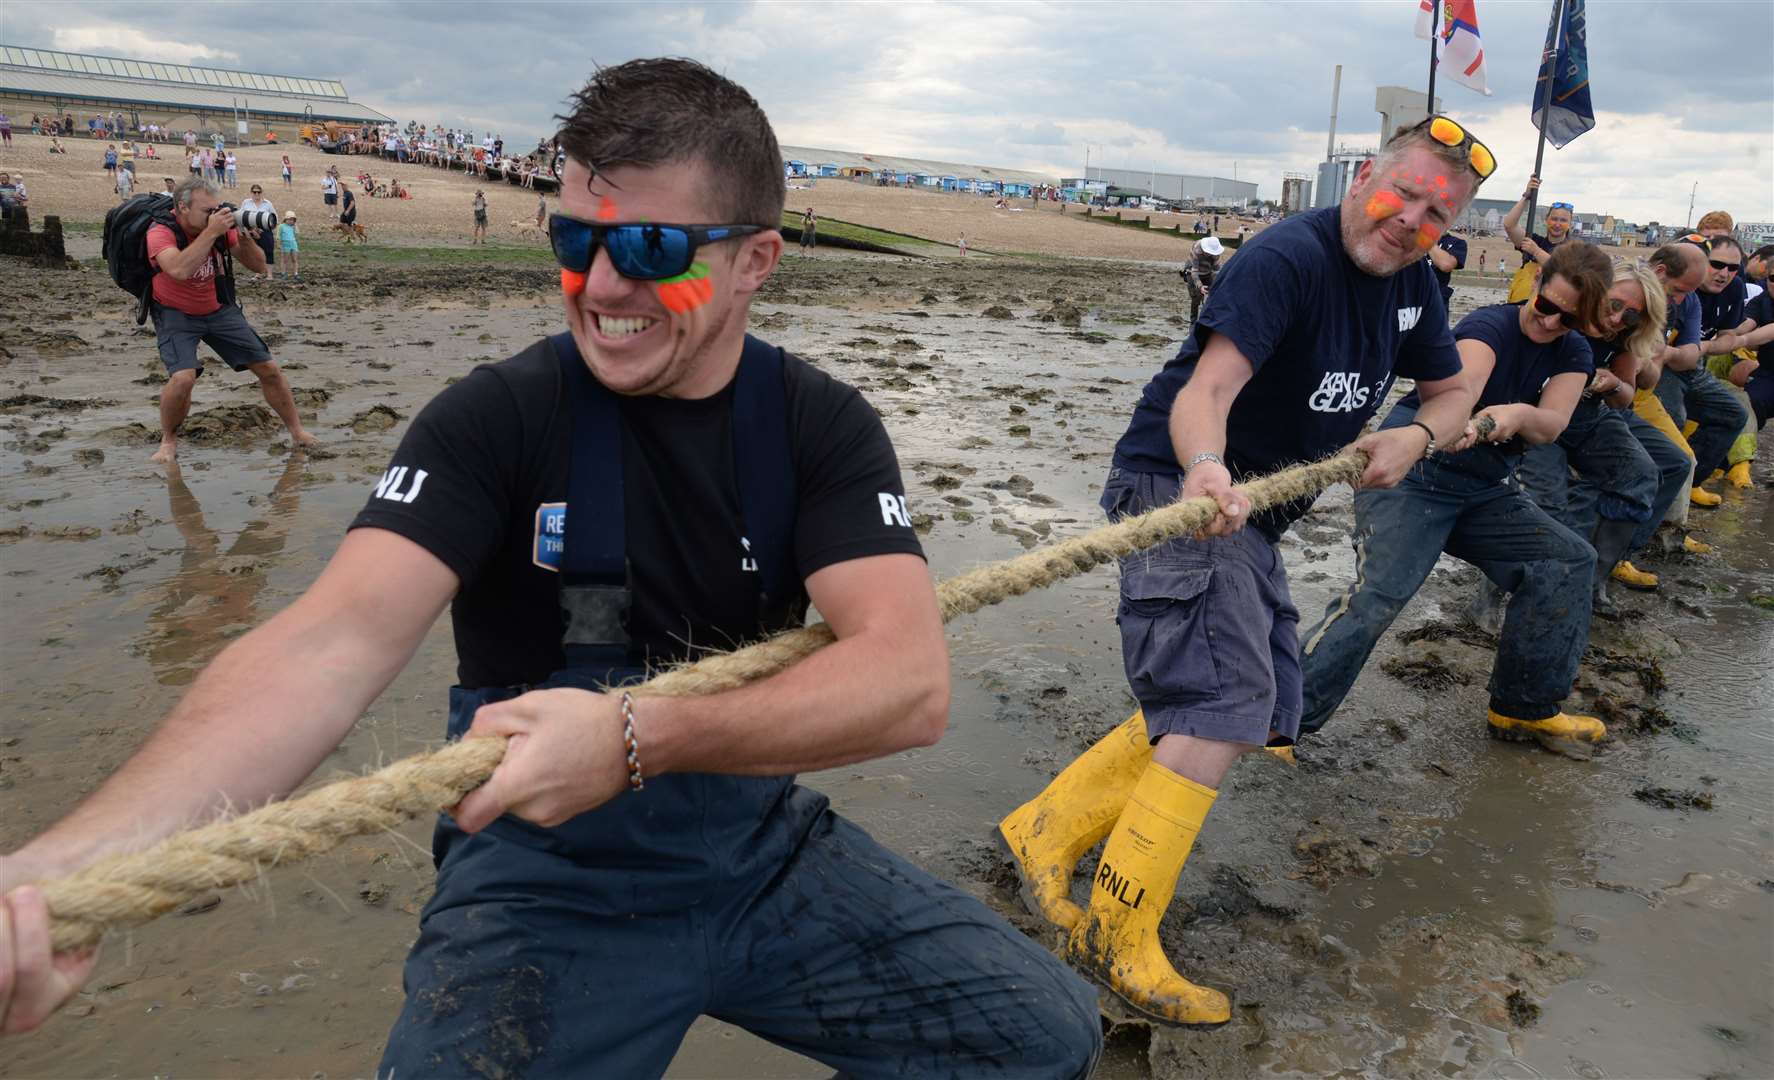 The Whitstable Lifeboat team in action during the Mud Tug Picture: Chris Davey